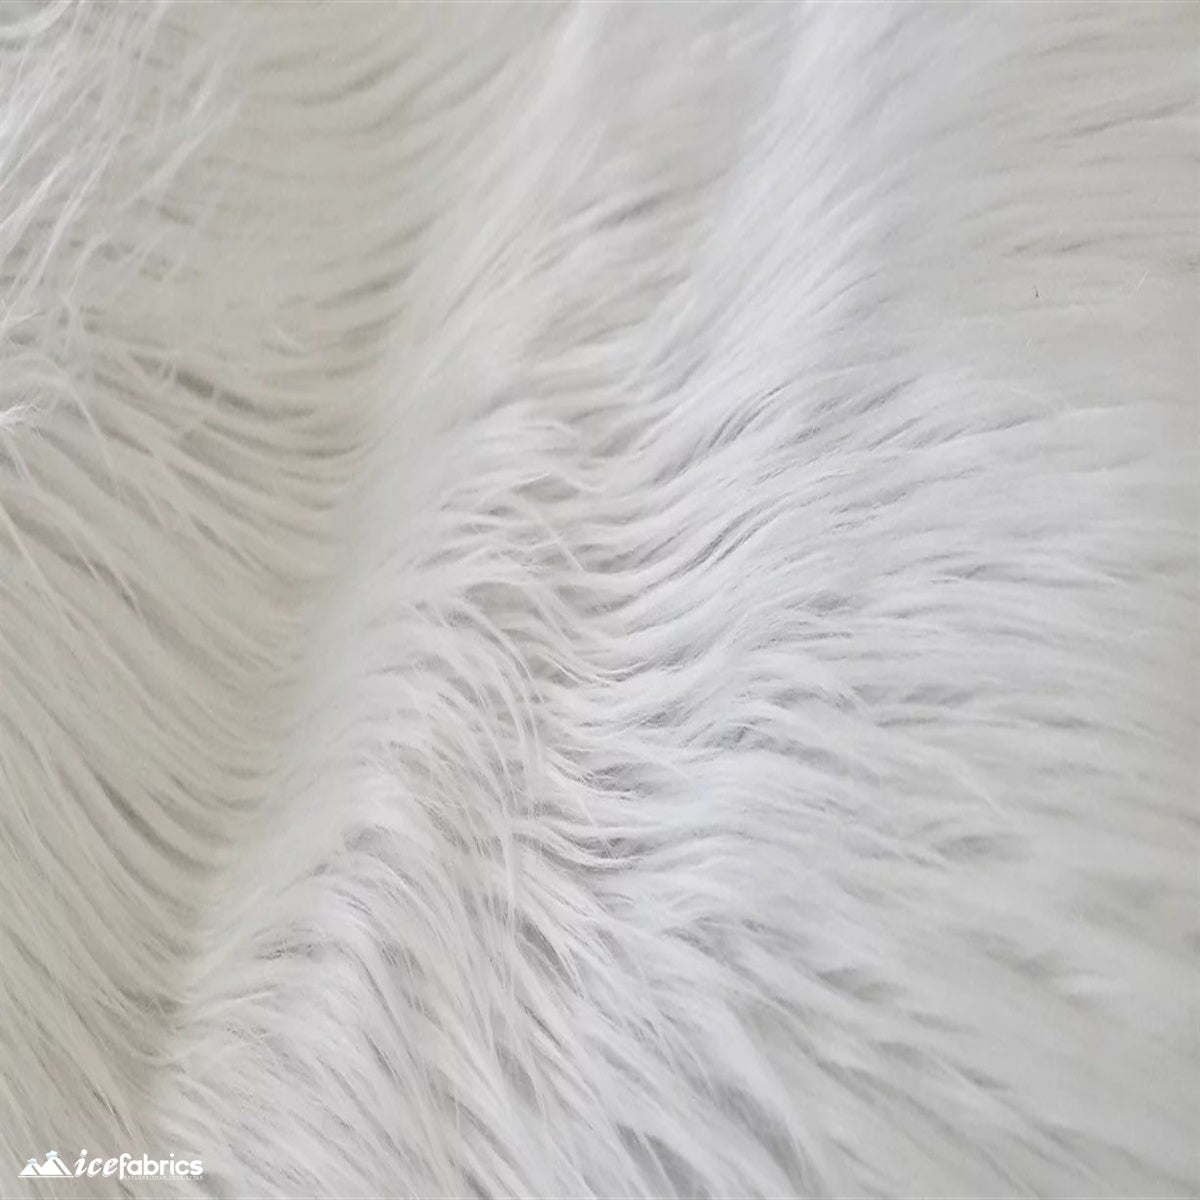 Mohair Faux Fur Fabric By The Roll (20 Yards) 4 Inch PileICE FABRICSICE FABRICSWhiteBy The Roll (60" Wide)Mohair Faux Fur Fabric By The Roll (20 Yards) 4 Inch Pile ICE FABRICS